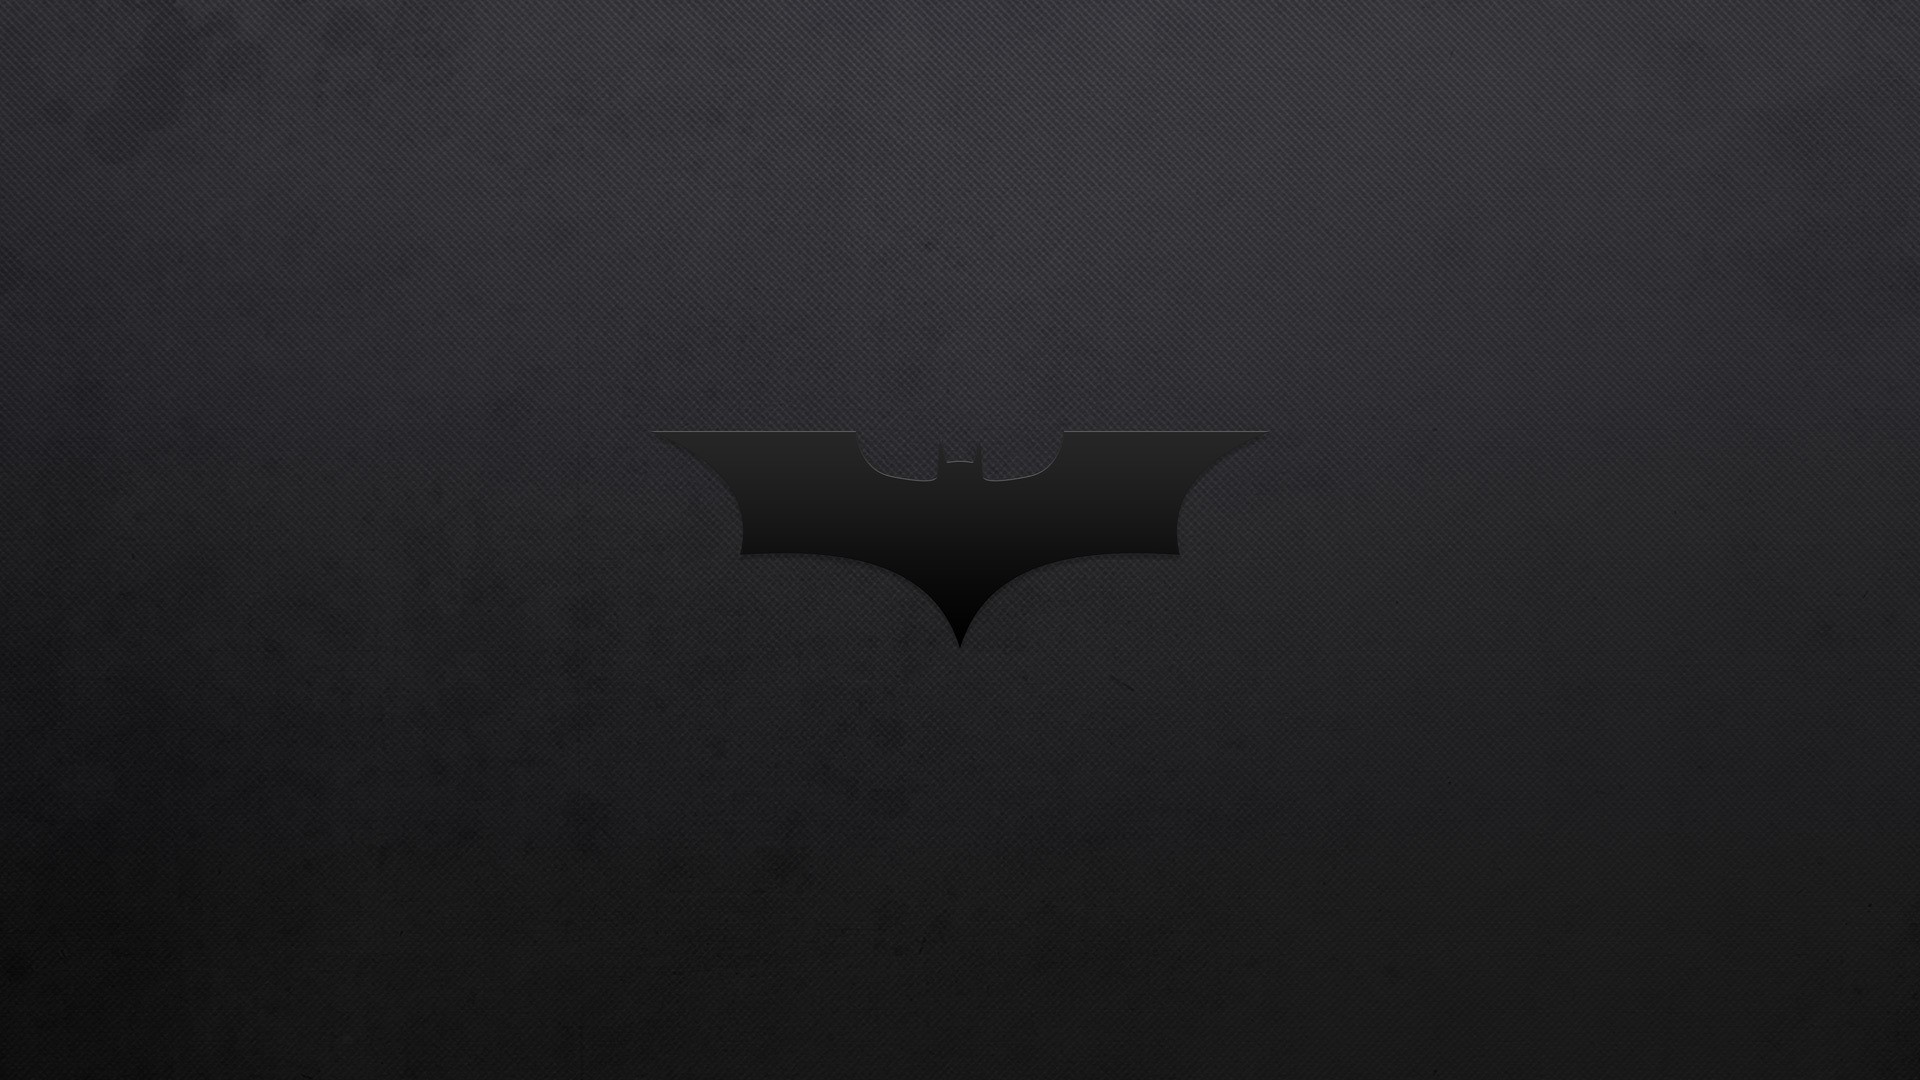 1920x1080 Justice League Wallpaper iPhone X Luxury 50 Batman Logo Wallpapers for Free  Download Hd 1080p Of